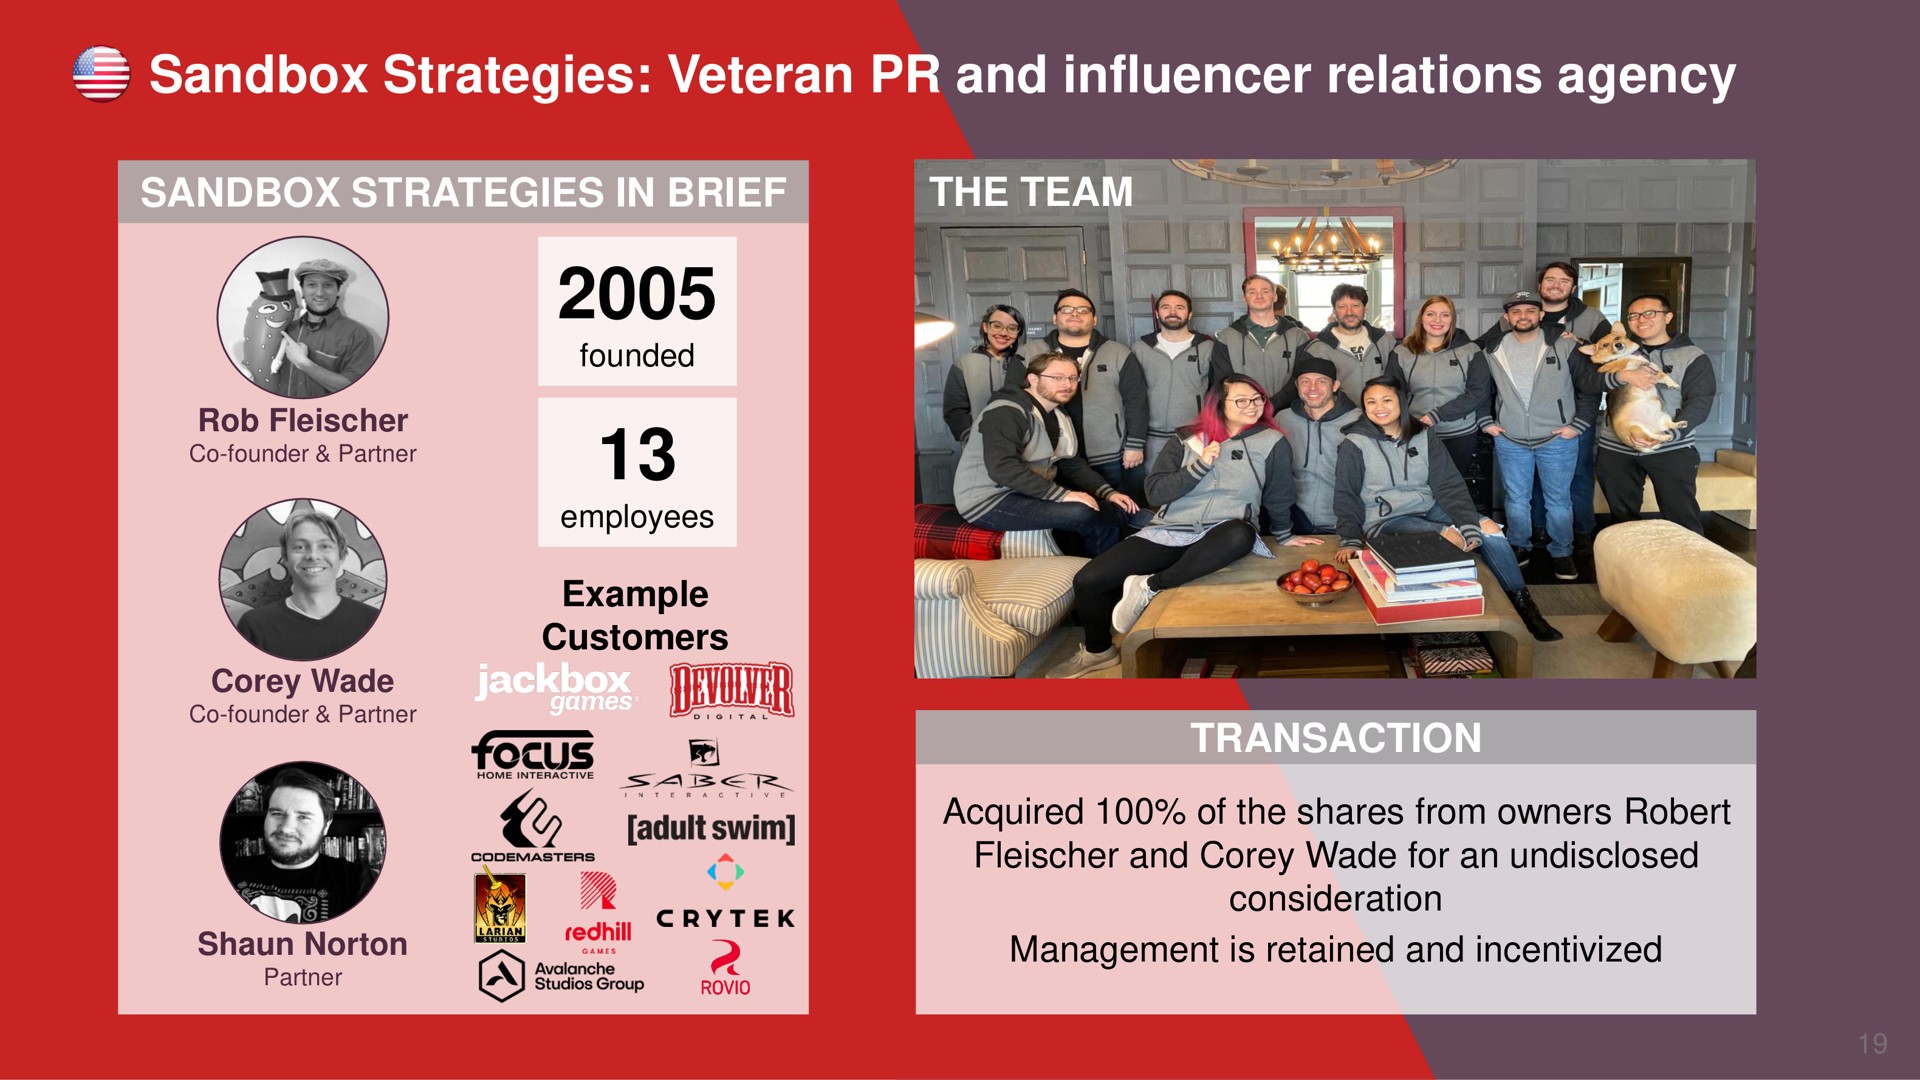 sandbox strategies veteran and influencer relations agency | Embracer Group